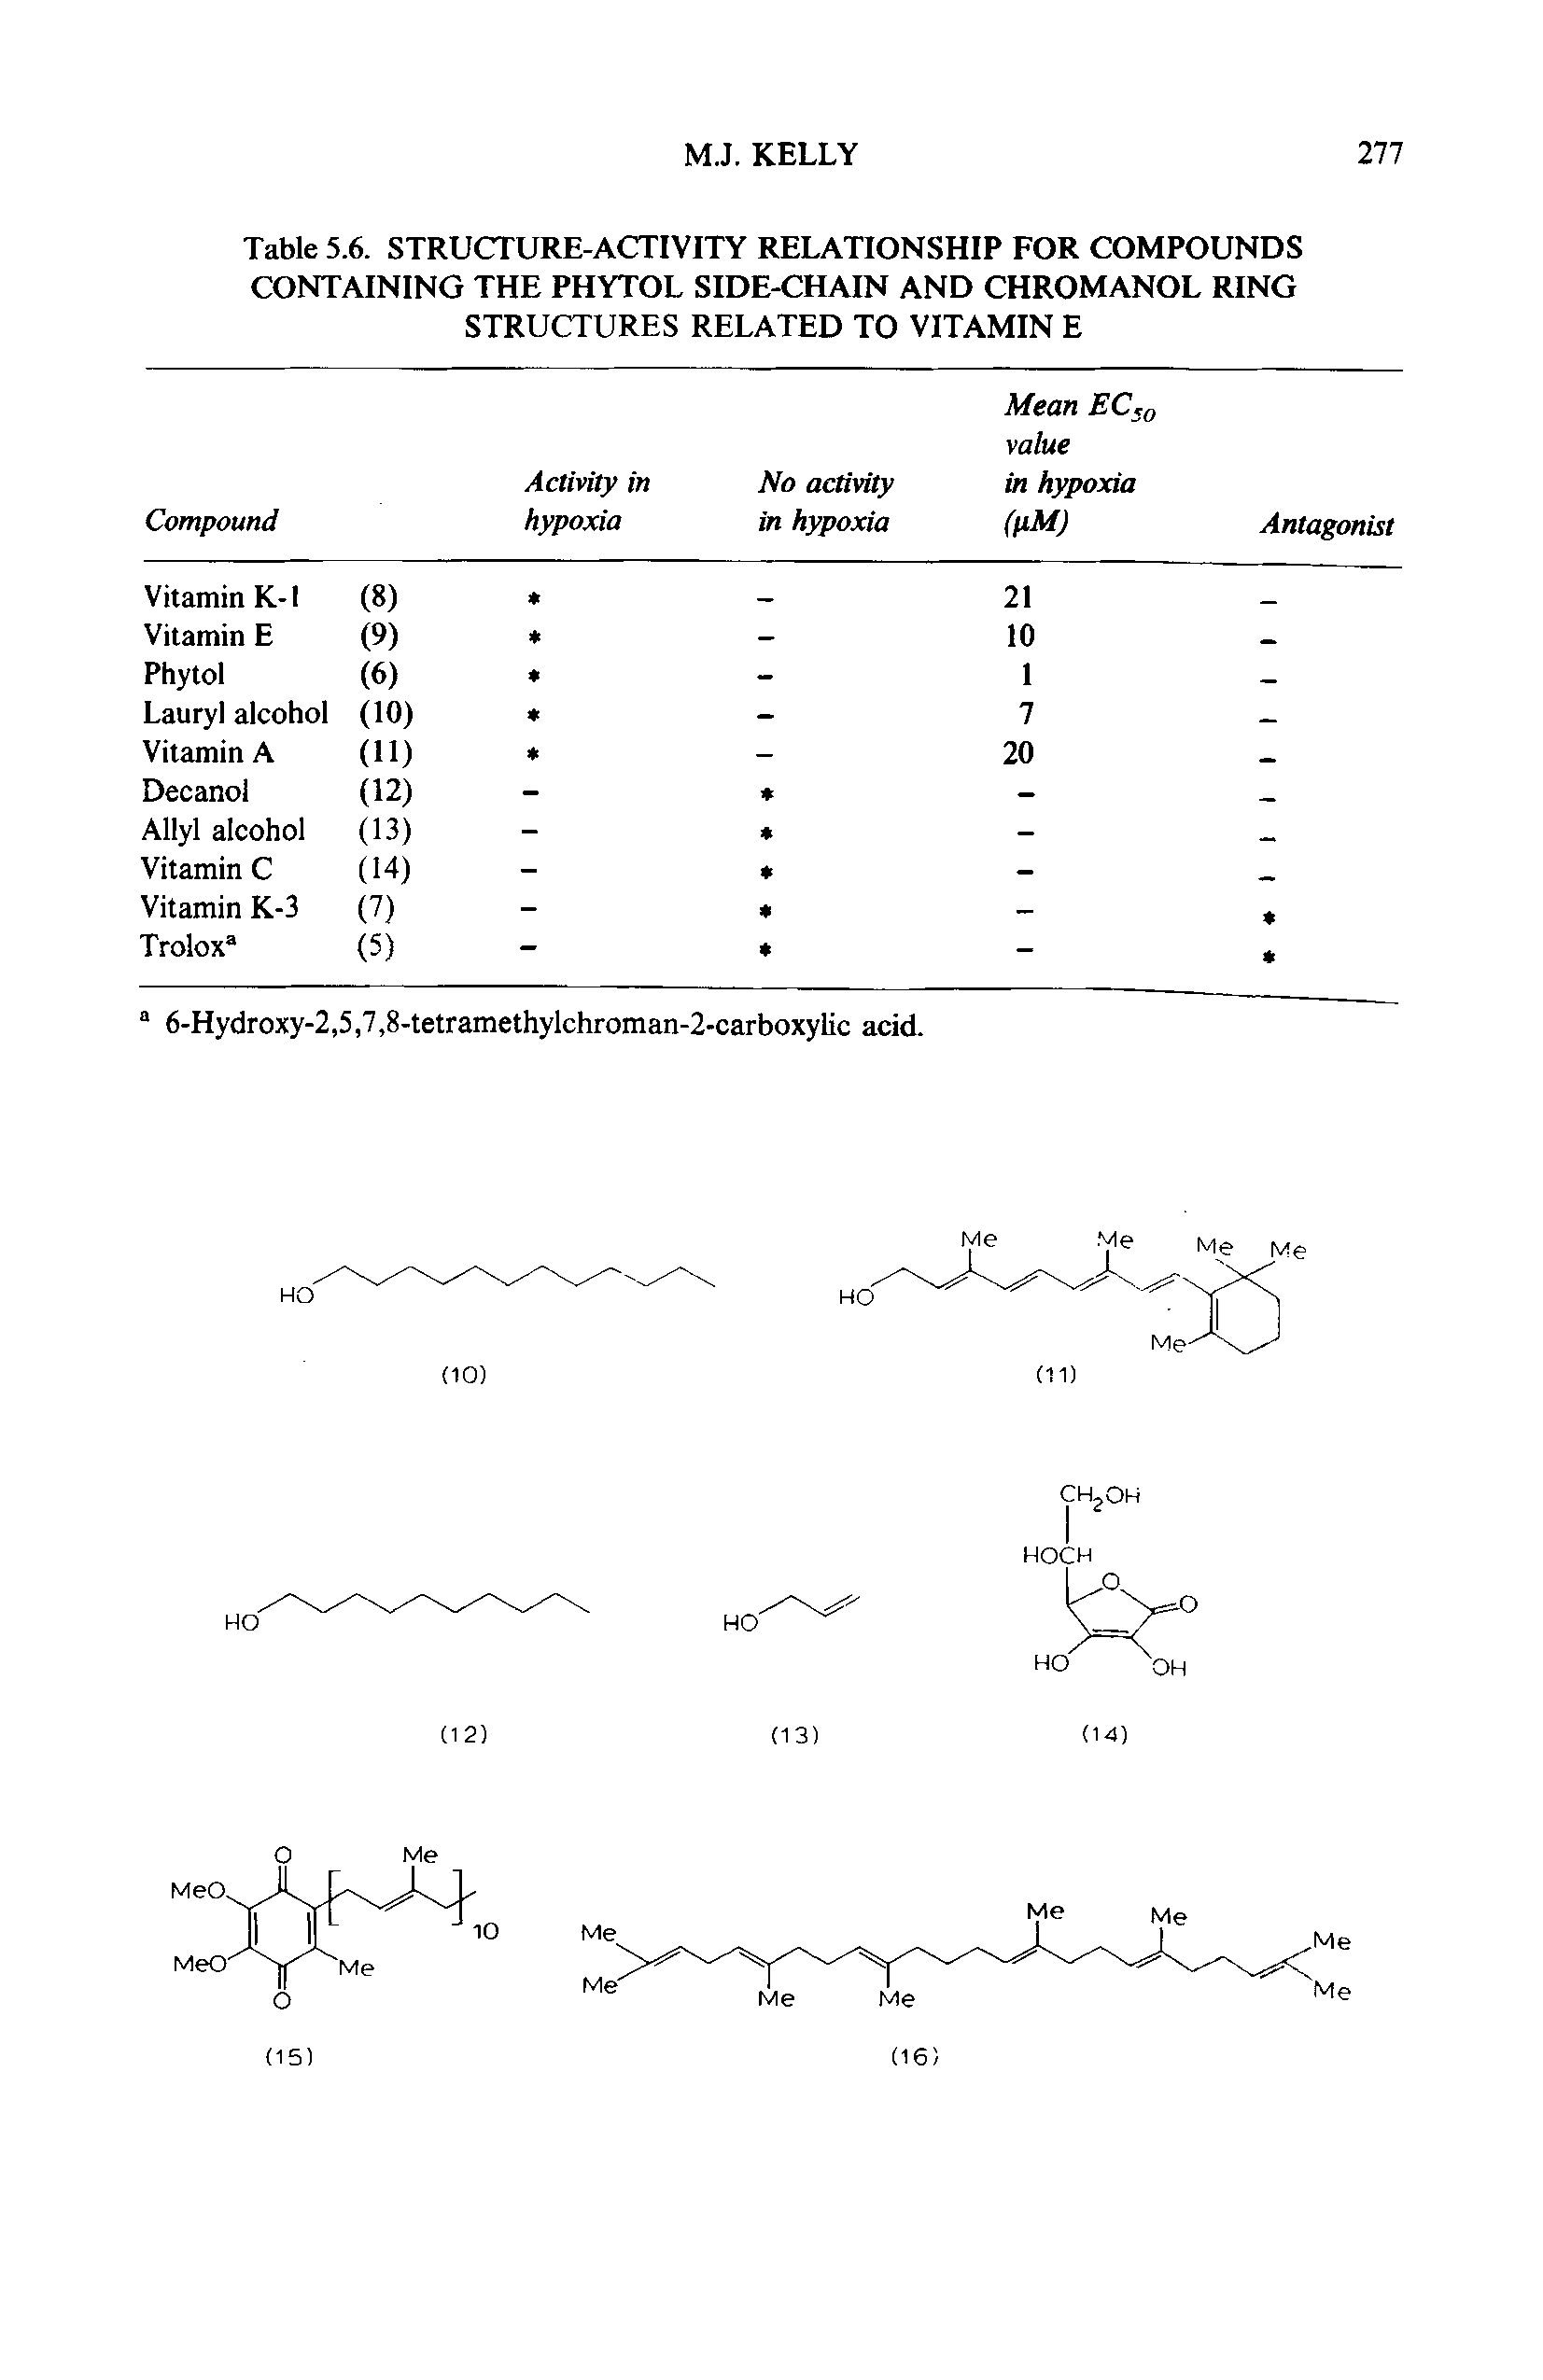 Table 5.6. STRUCTURE-ACTIVITY RELATIONSHIP FOR COMPOUNDS CONTAINING THE PHYTOL SIDE-CHAIN AND CHROMANOL RING STRUCTURES RELATED TO VITAMIN E...